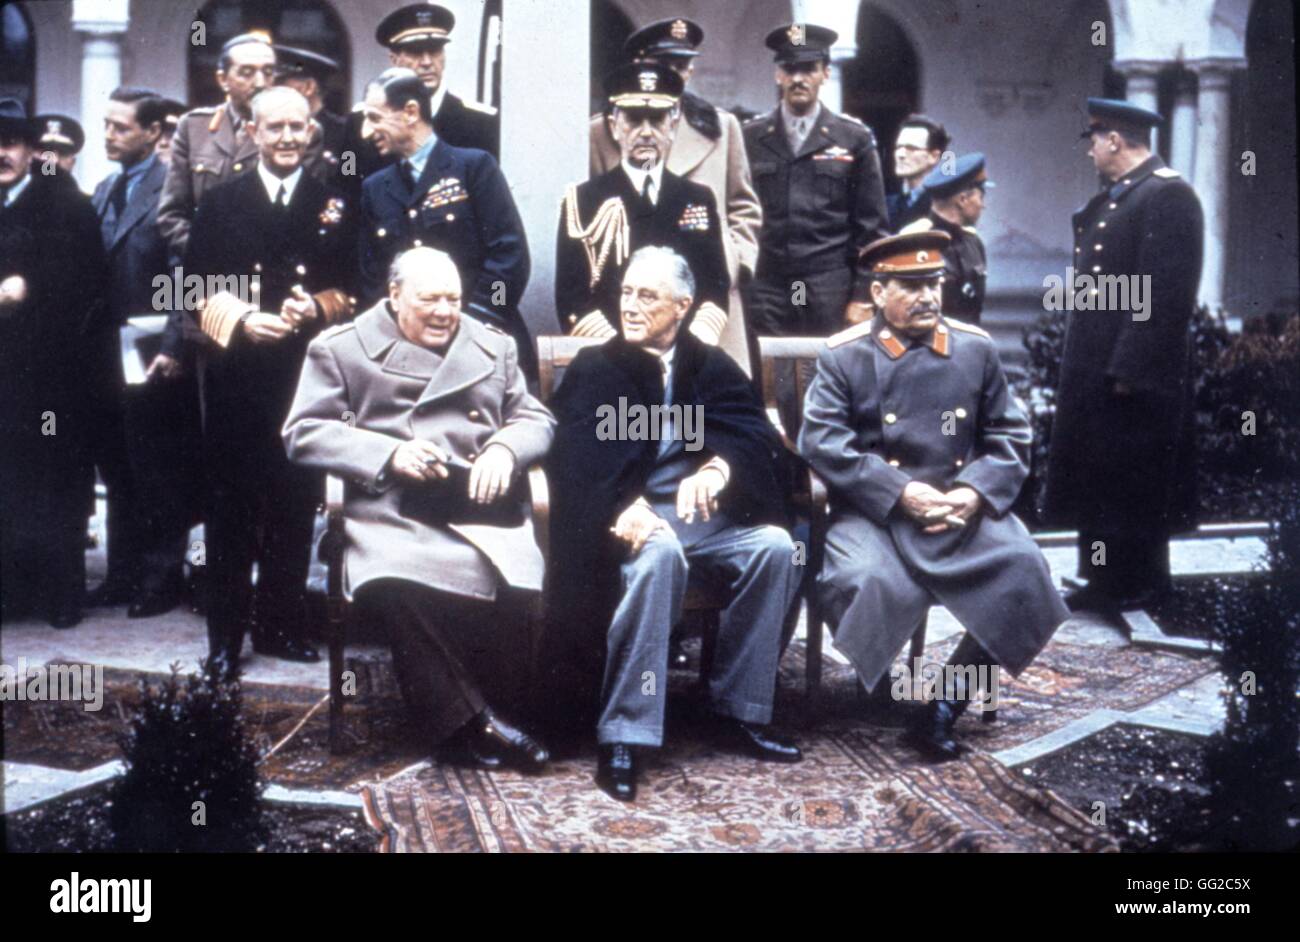 Yalta Conference (Crimea). Churchill, Roosevelt and Stalin, in the foreground. Admiral D. Leahy (behind Roosevelt), sir A. Cunningham (behind Churchill). On the left, E. Estattinius and Molotov can be seen. February 1945 U.S.S.R. - World War II U.S. Army Stock Photo